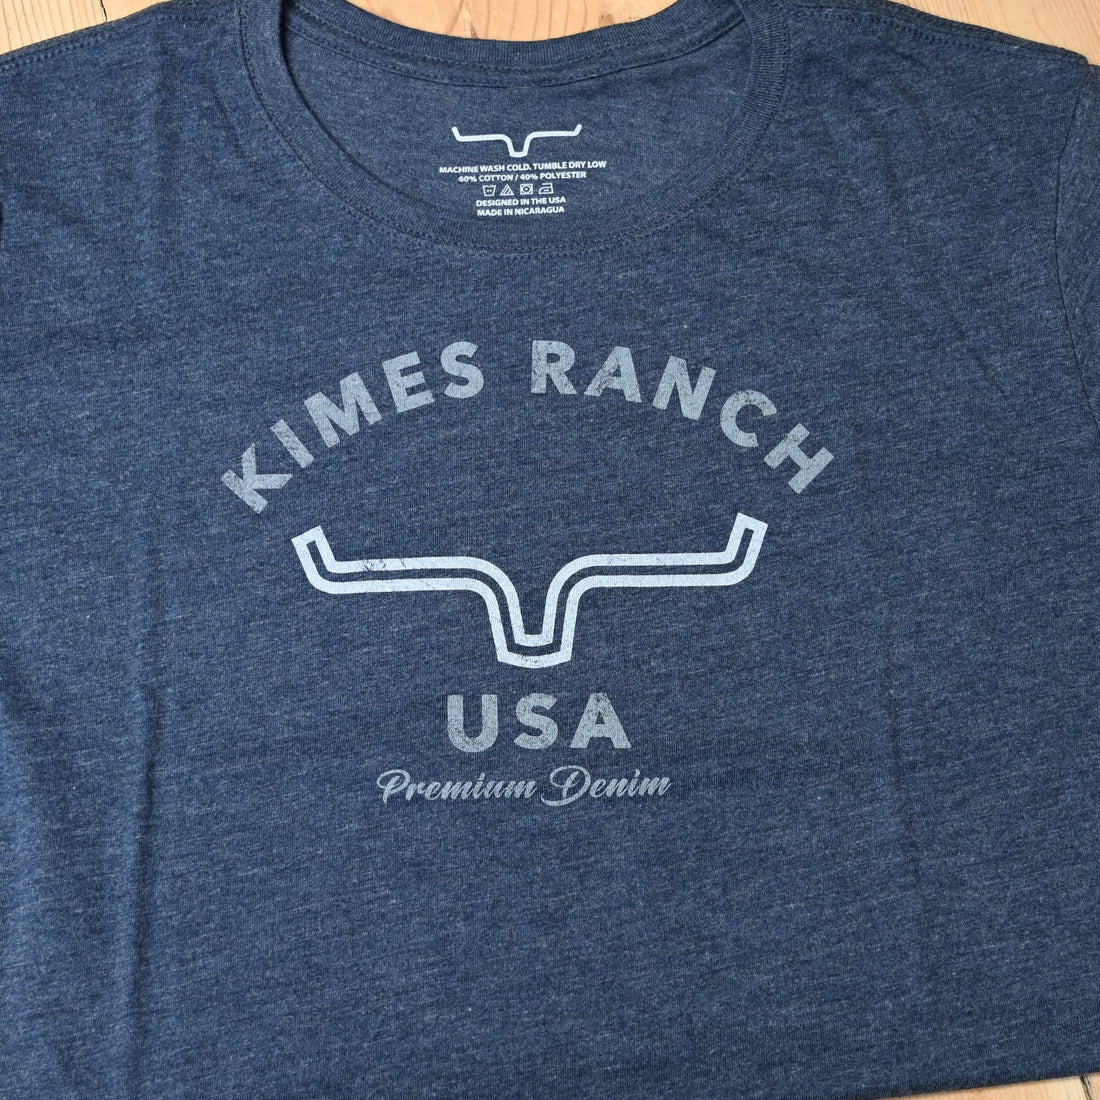 Kimes Ranch Arch Tees in Vintage Navy view of tee